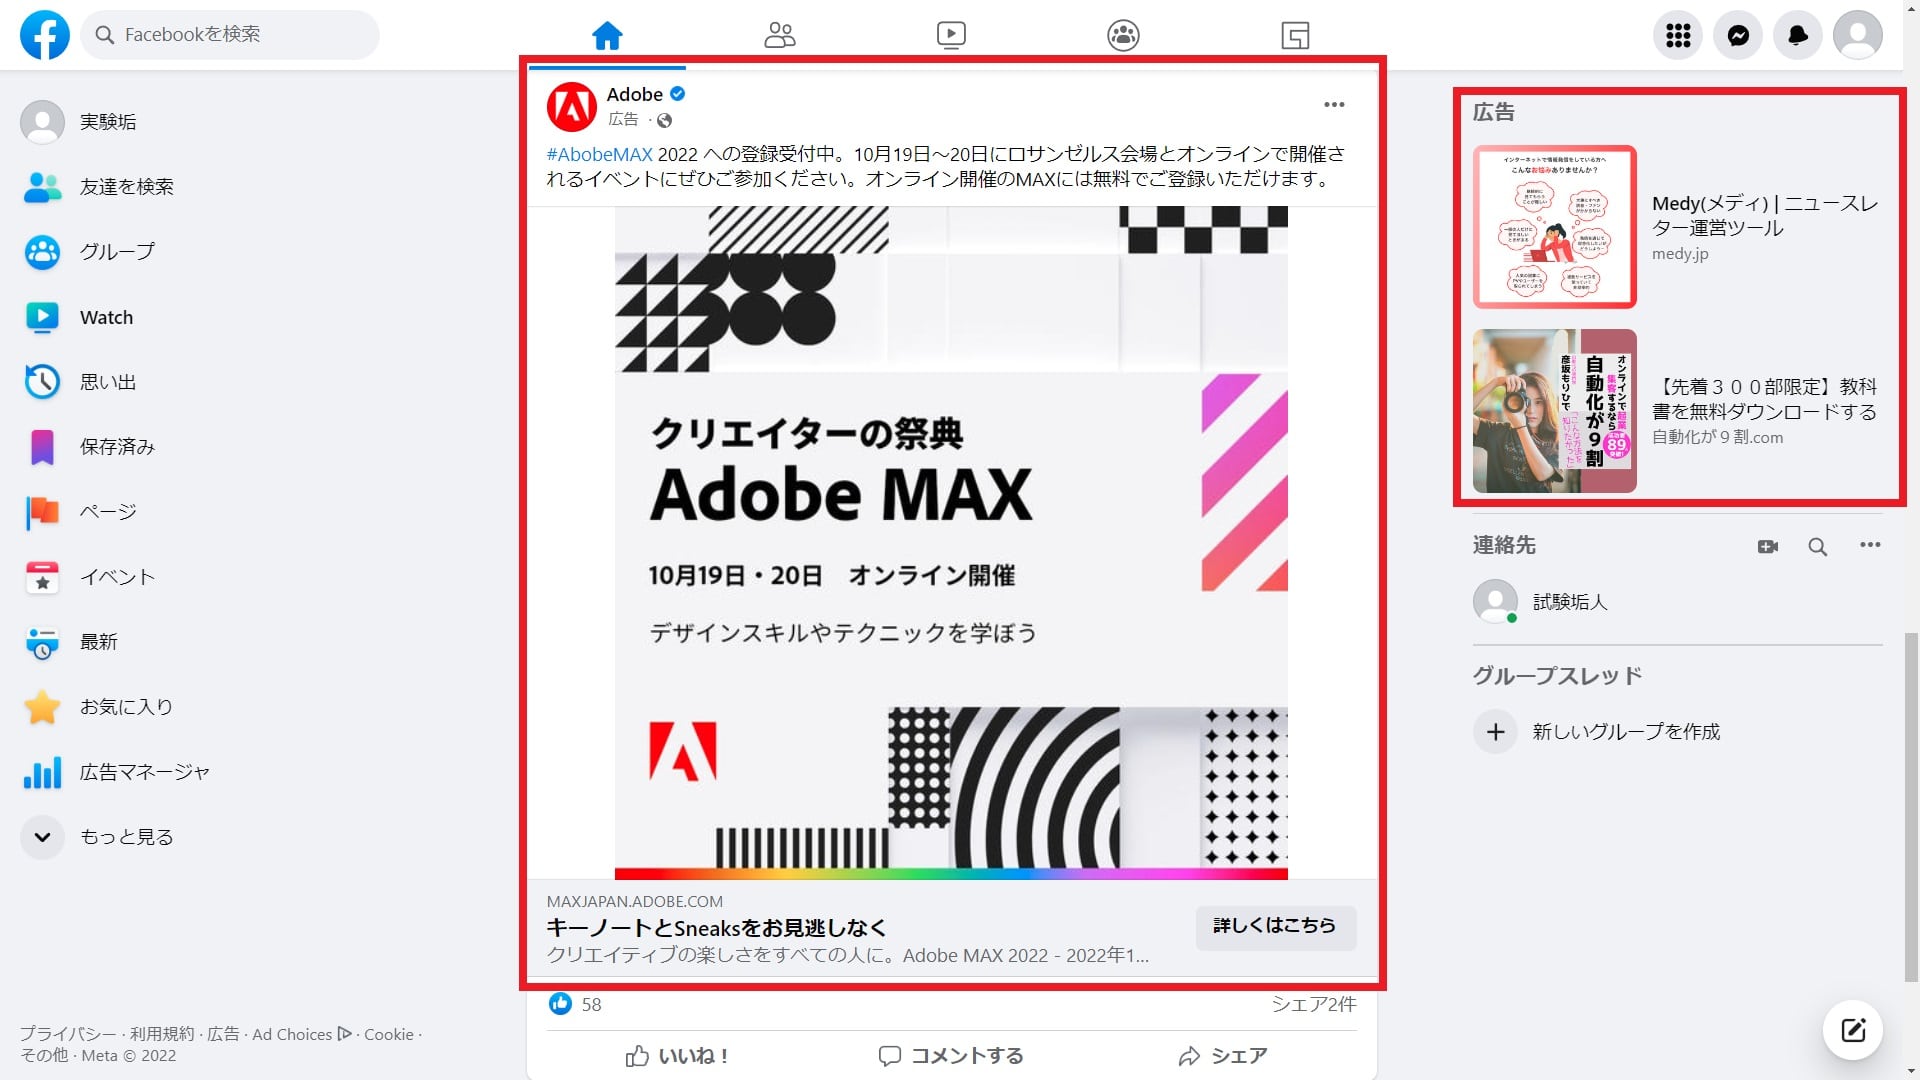 Facebook広告の配信面 | フィード/ストーリーズなど3種類